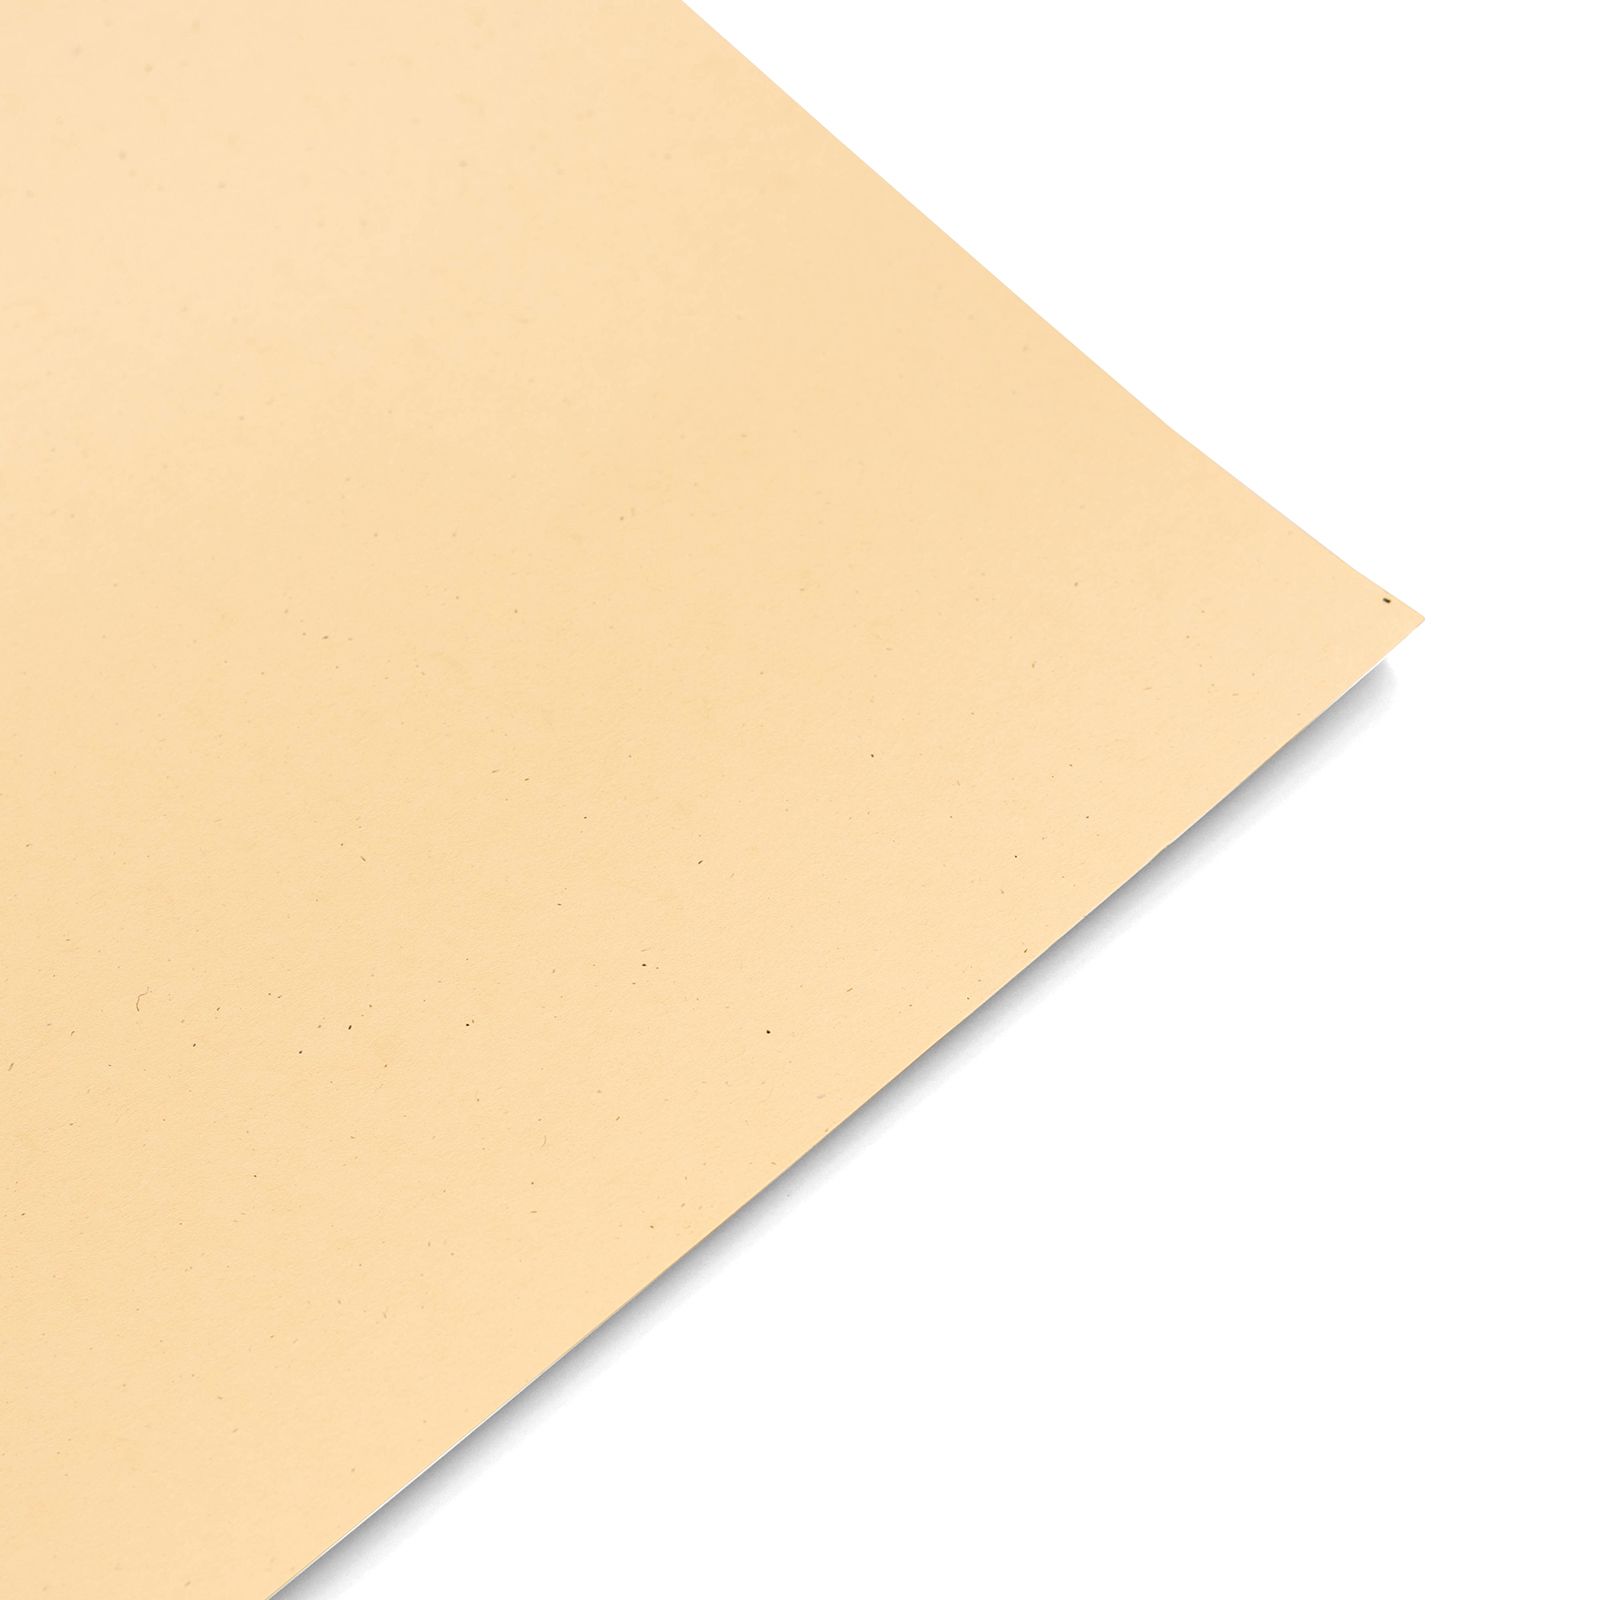 Desert Storm Brown Card Stock - 12 x 12 Environment Smooth 80lb Cover